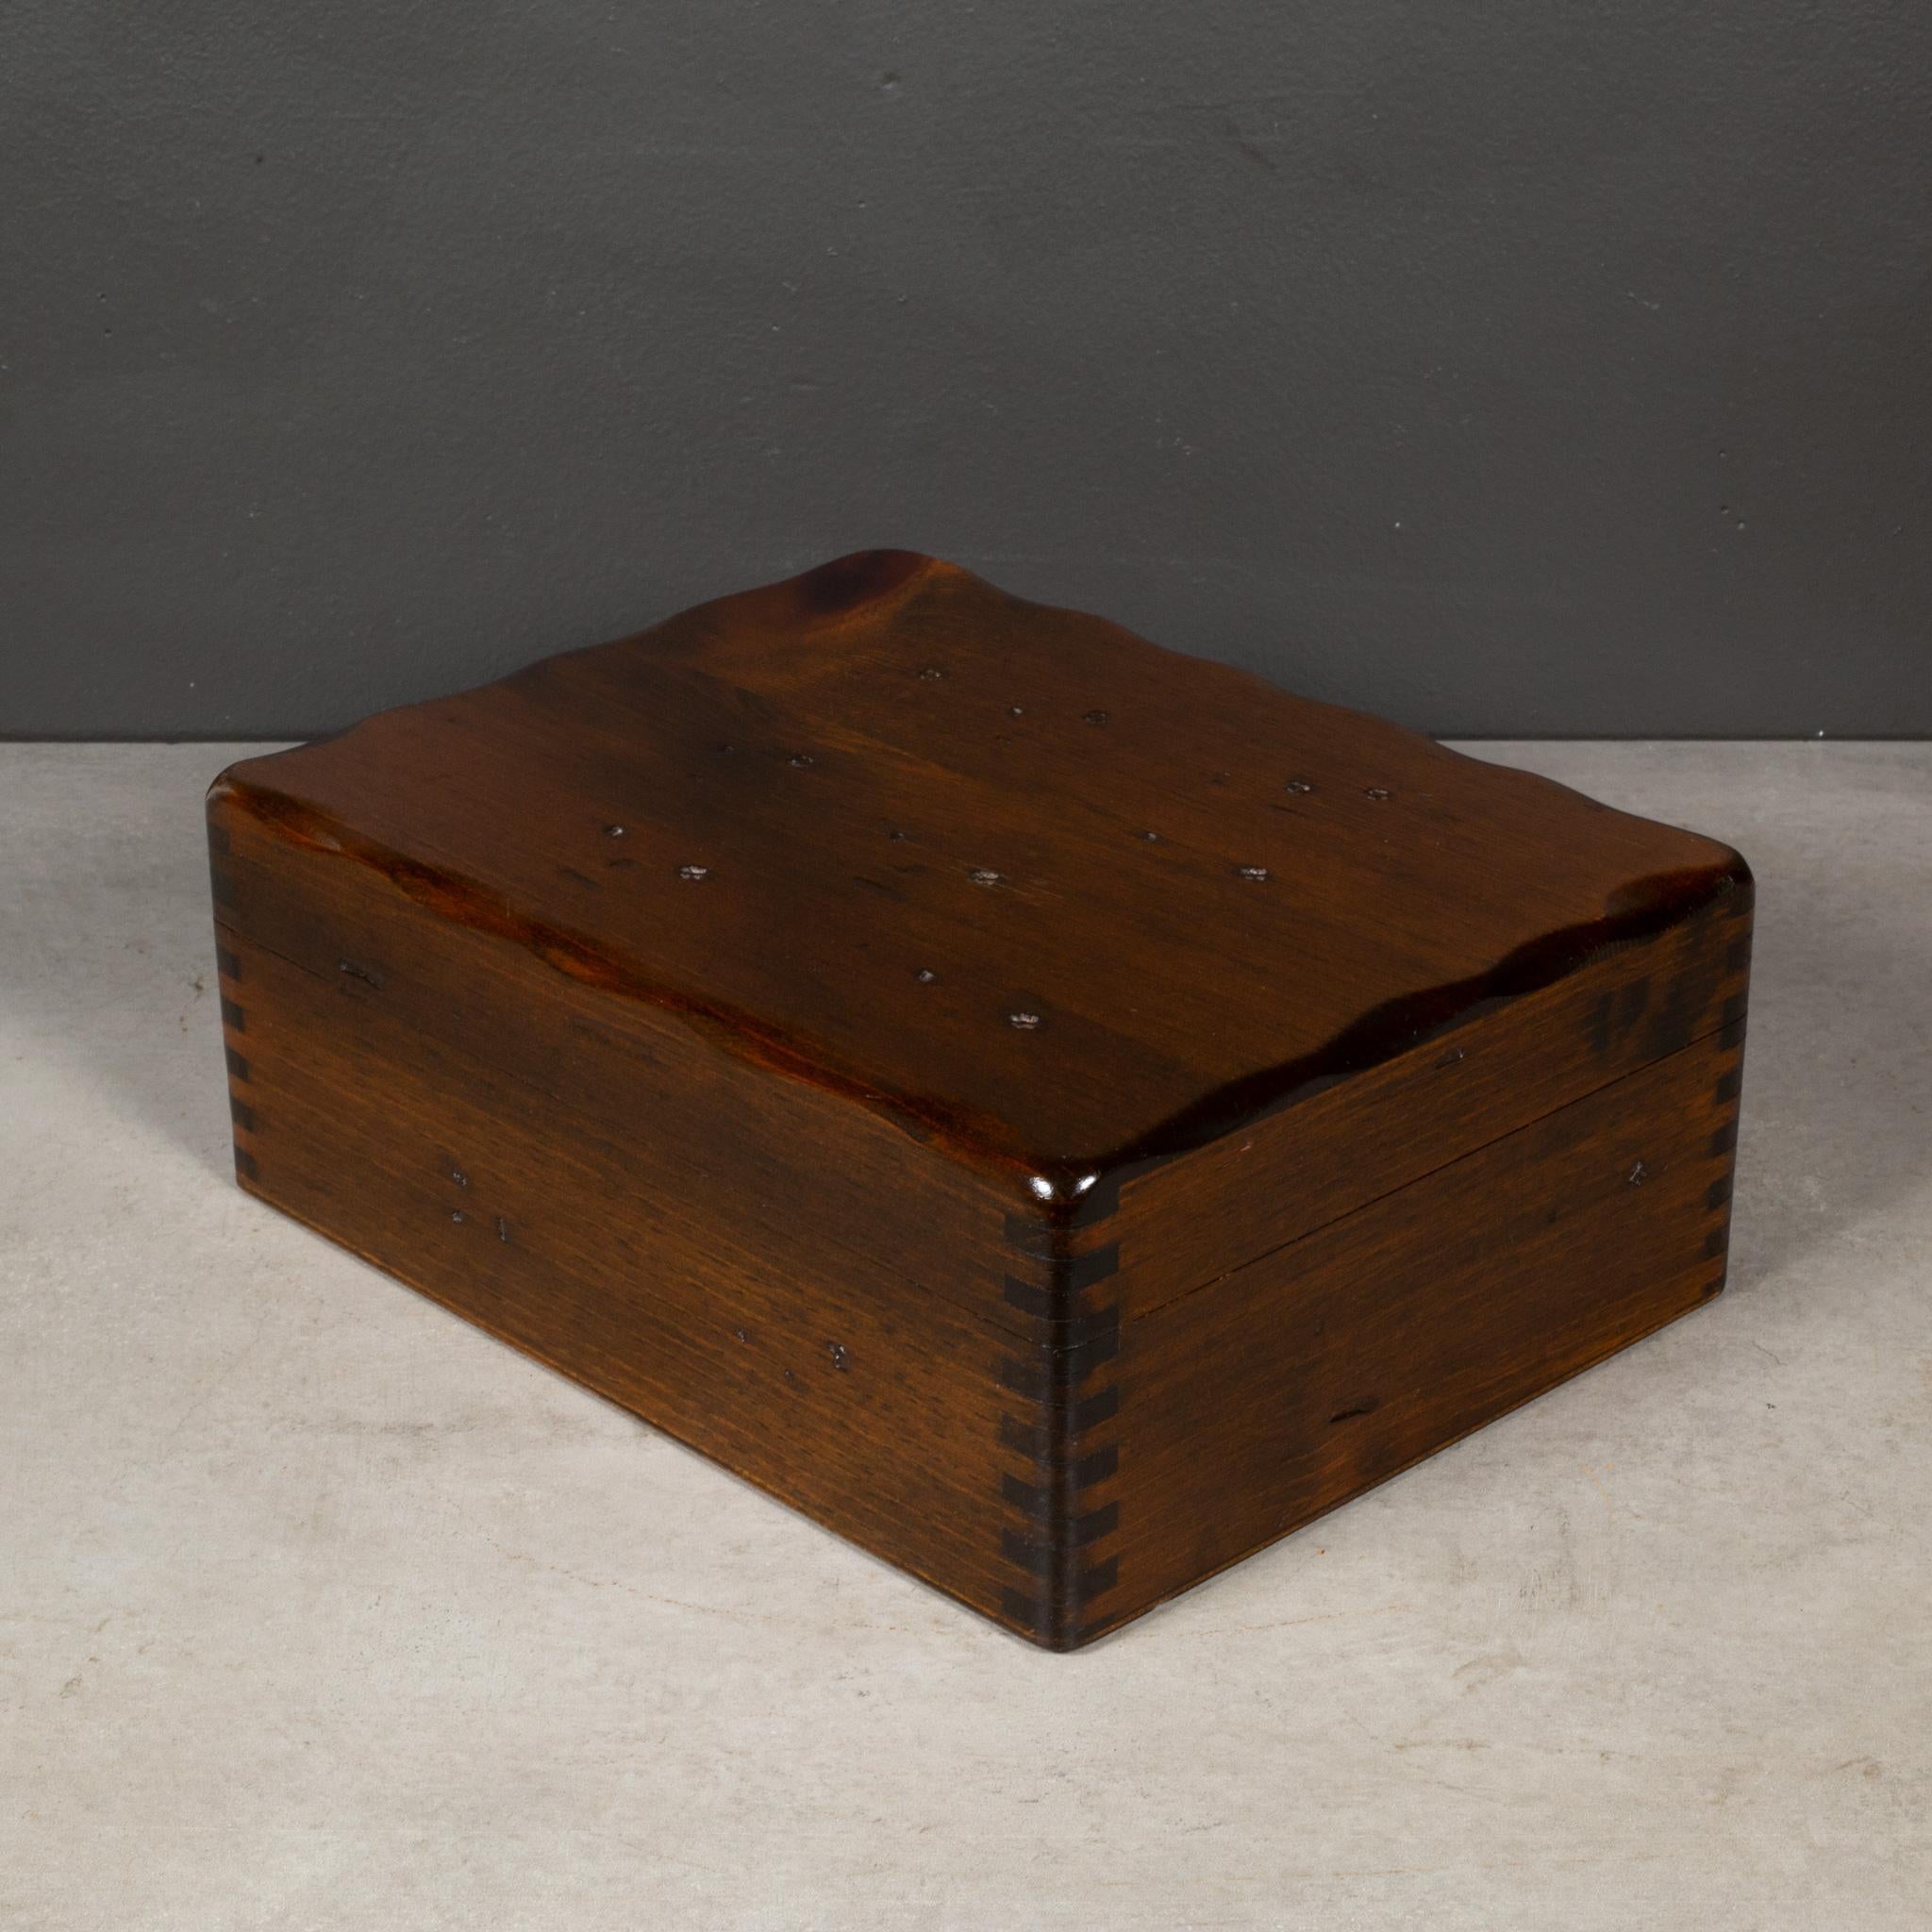 ABOUT

A Walnut humidor with a scalloped edges and dovetail joints. Shown with live size hand model.

    CREATOR Avetop, Rhode Island.
    DATE OF MANUFACTURE c.1970.
    MATERIALS AND TECHNIQUES Walnut, Felt.
    CONDITION Good. Wear consistent